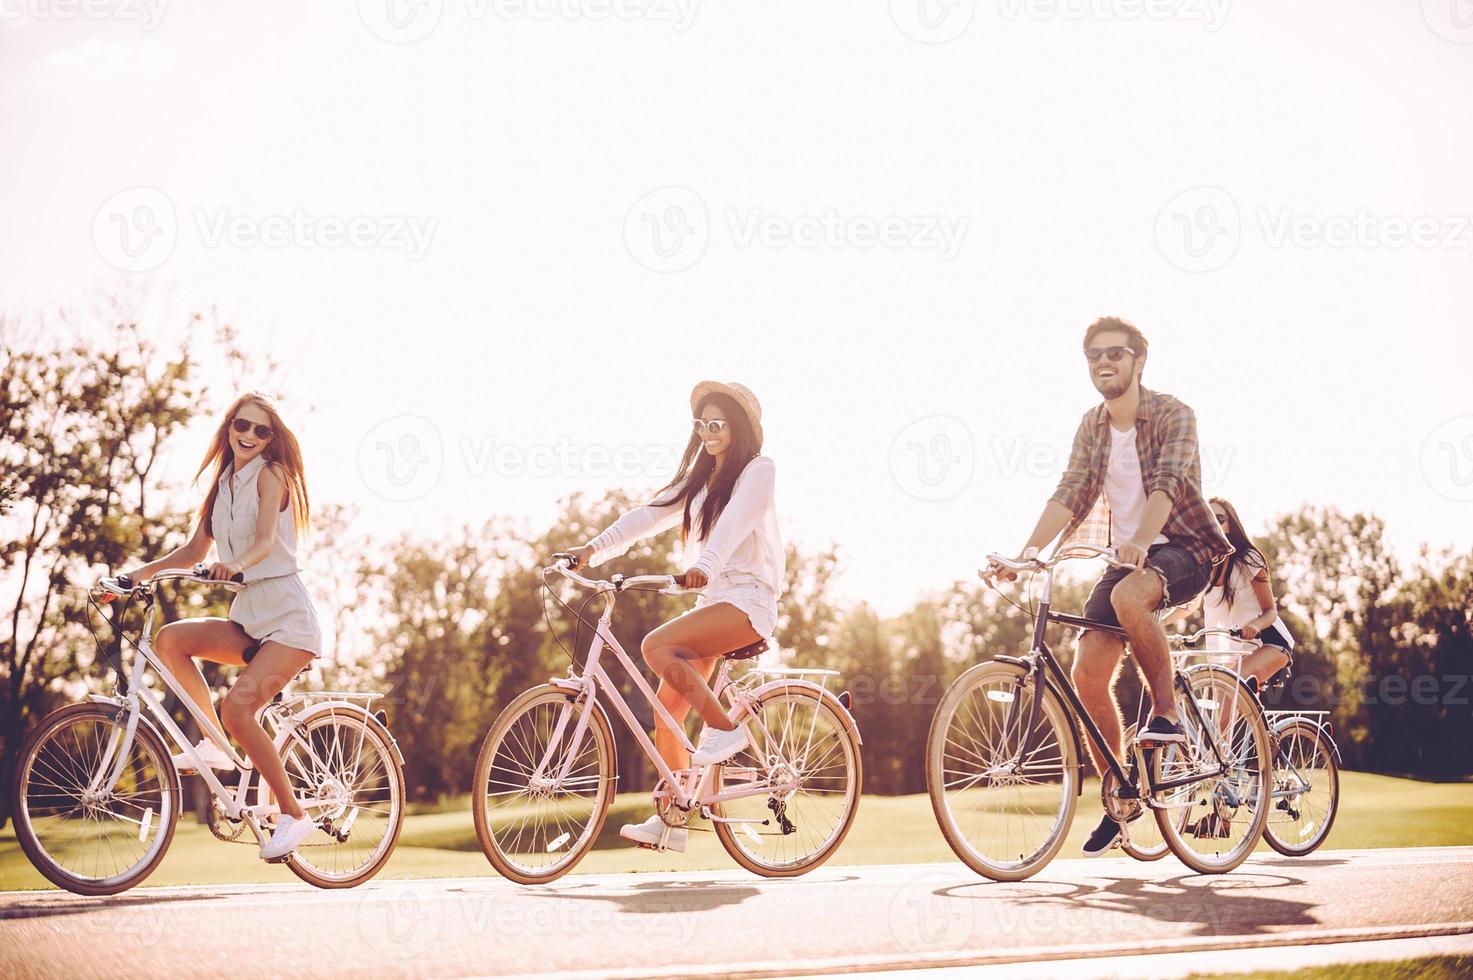 Spending nice summer day together. Group of young people riding bicycles along a road and looking happy photo